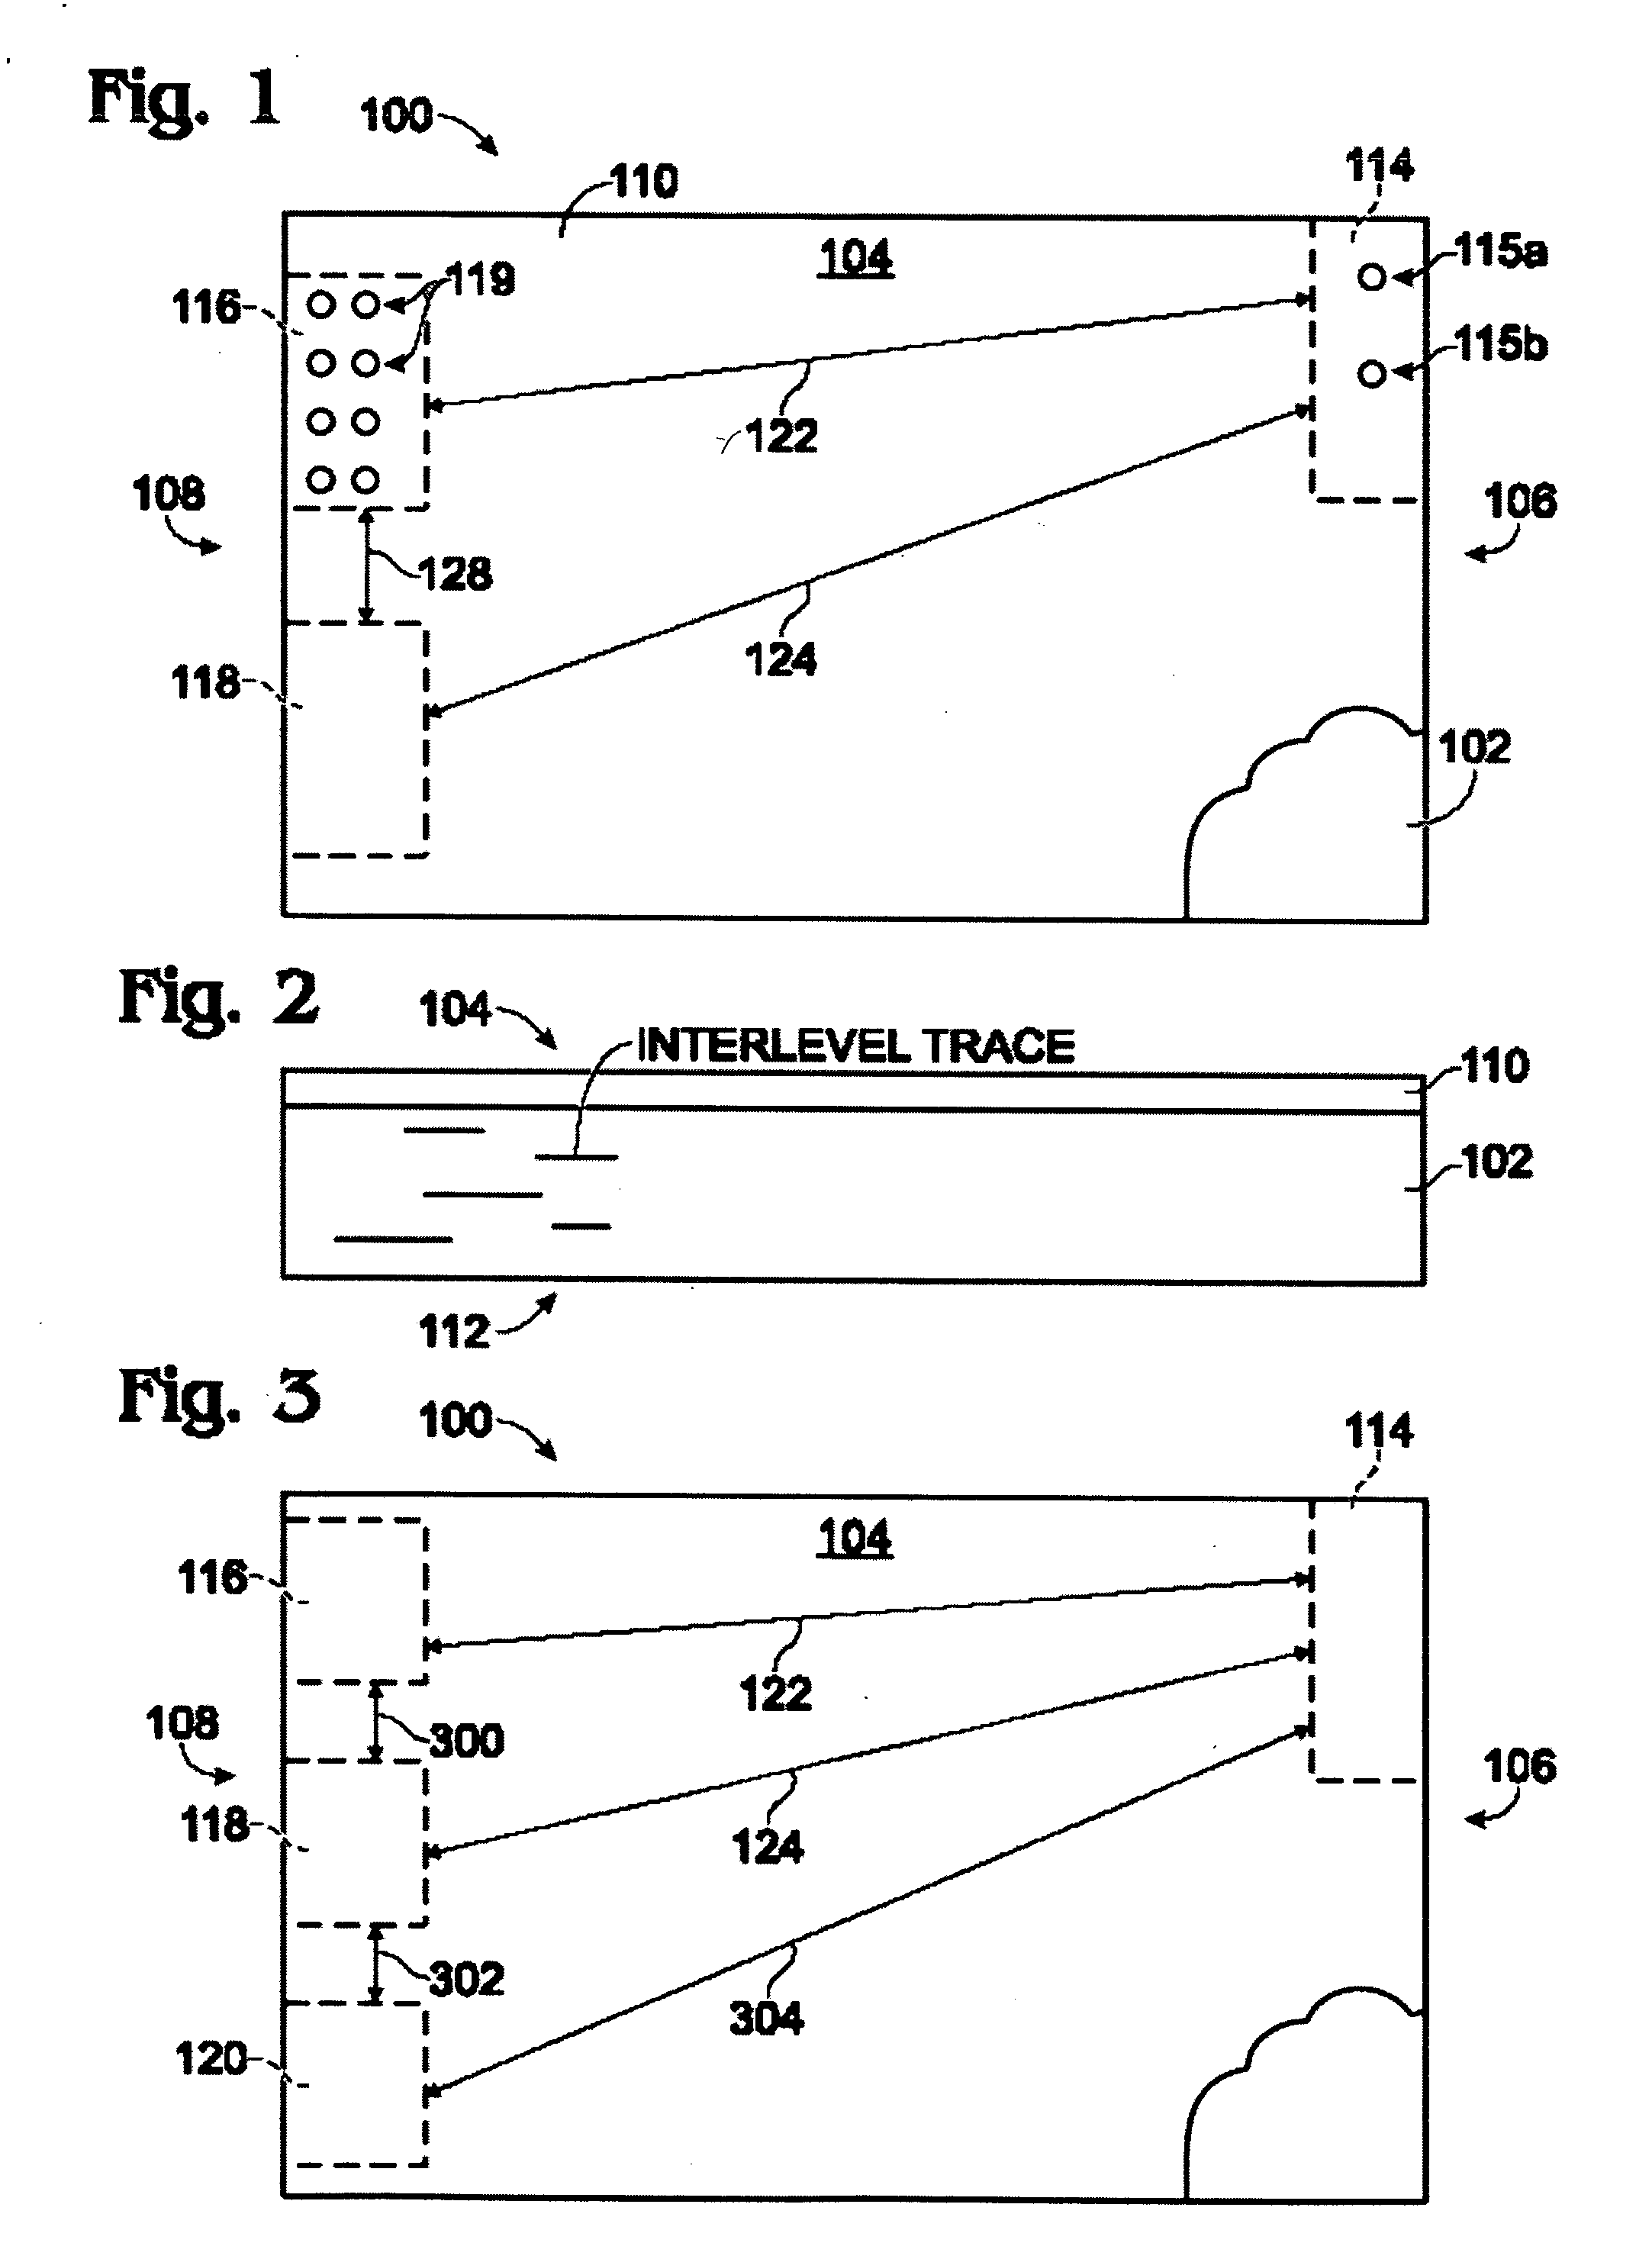 Multipart case wireless communications device with multiple groundplane connectors